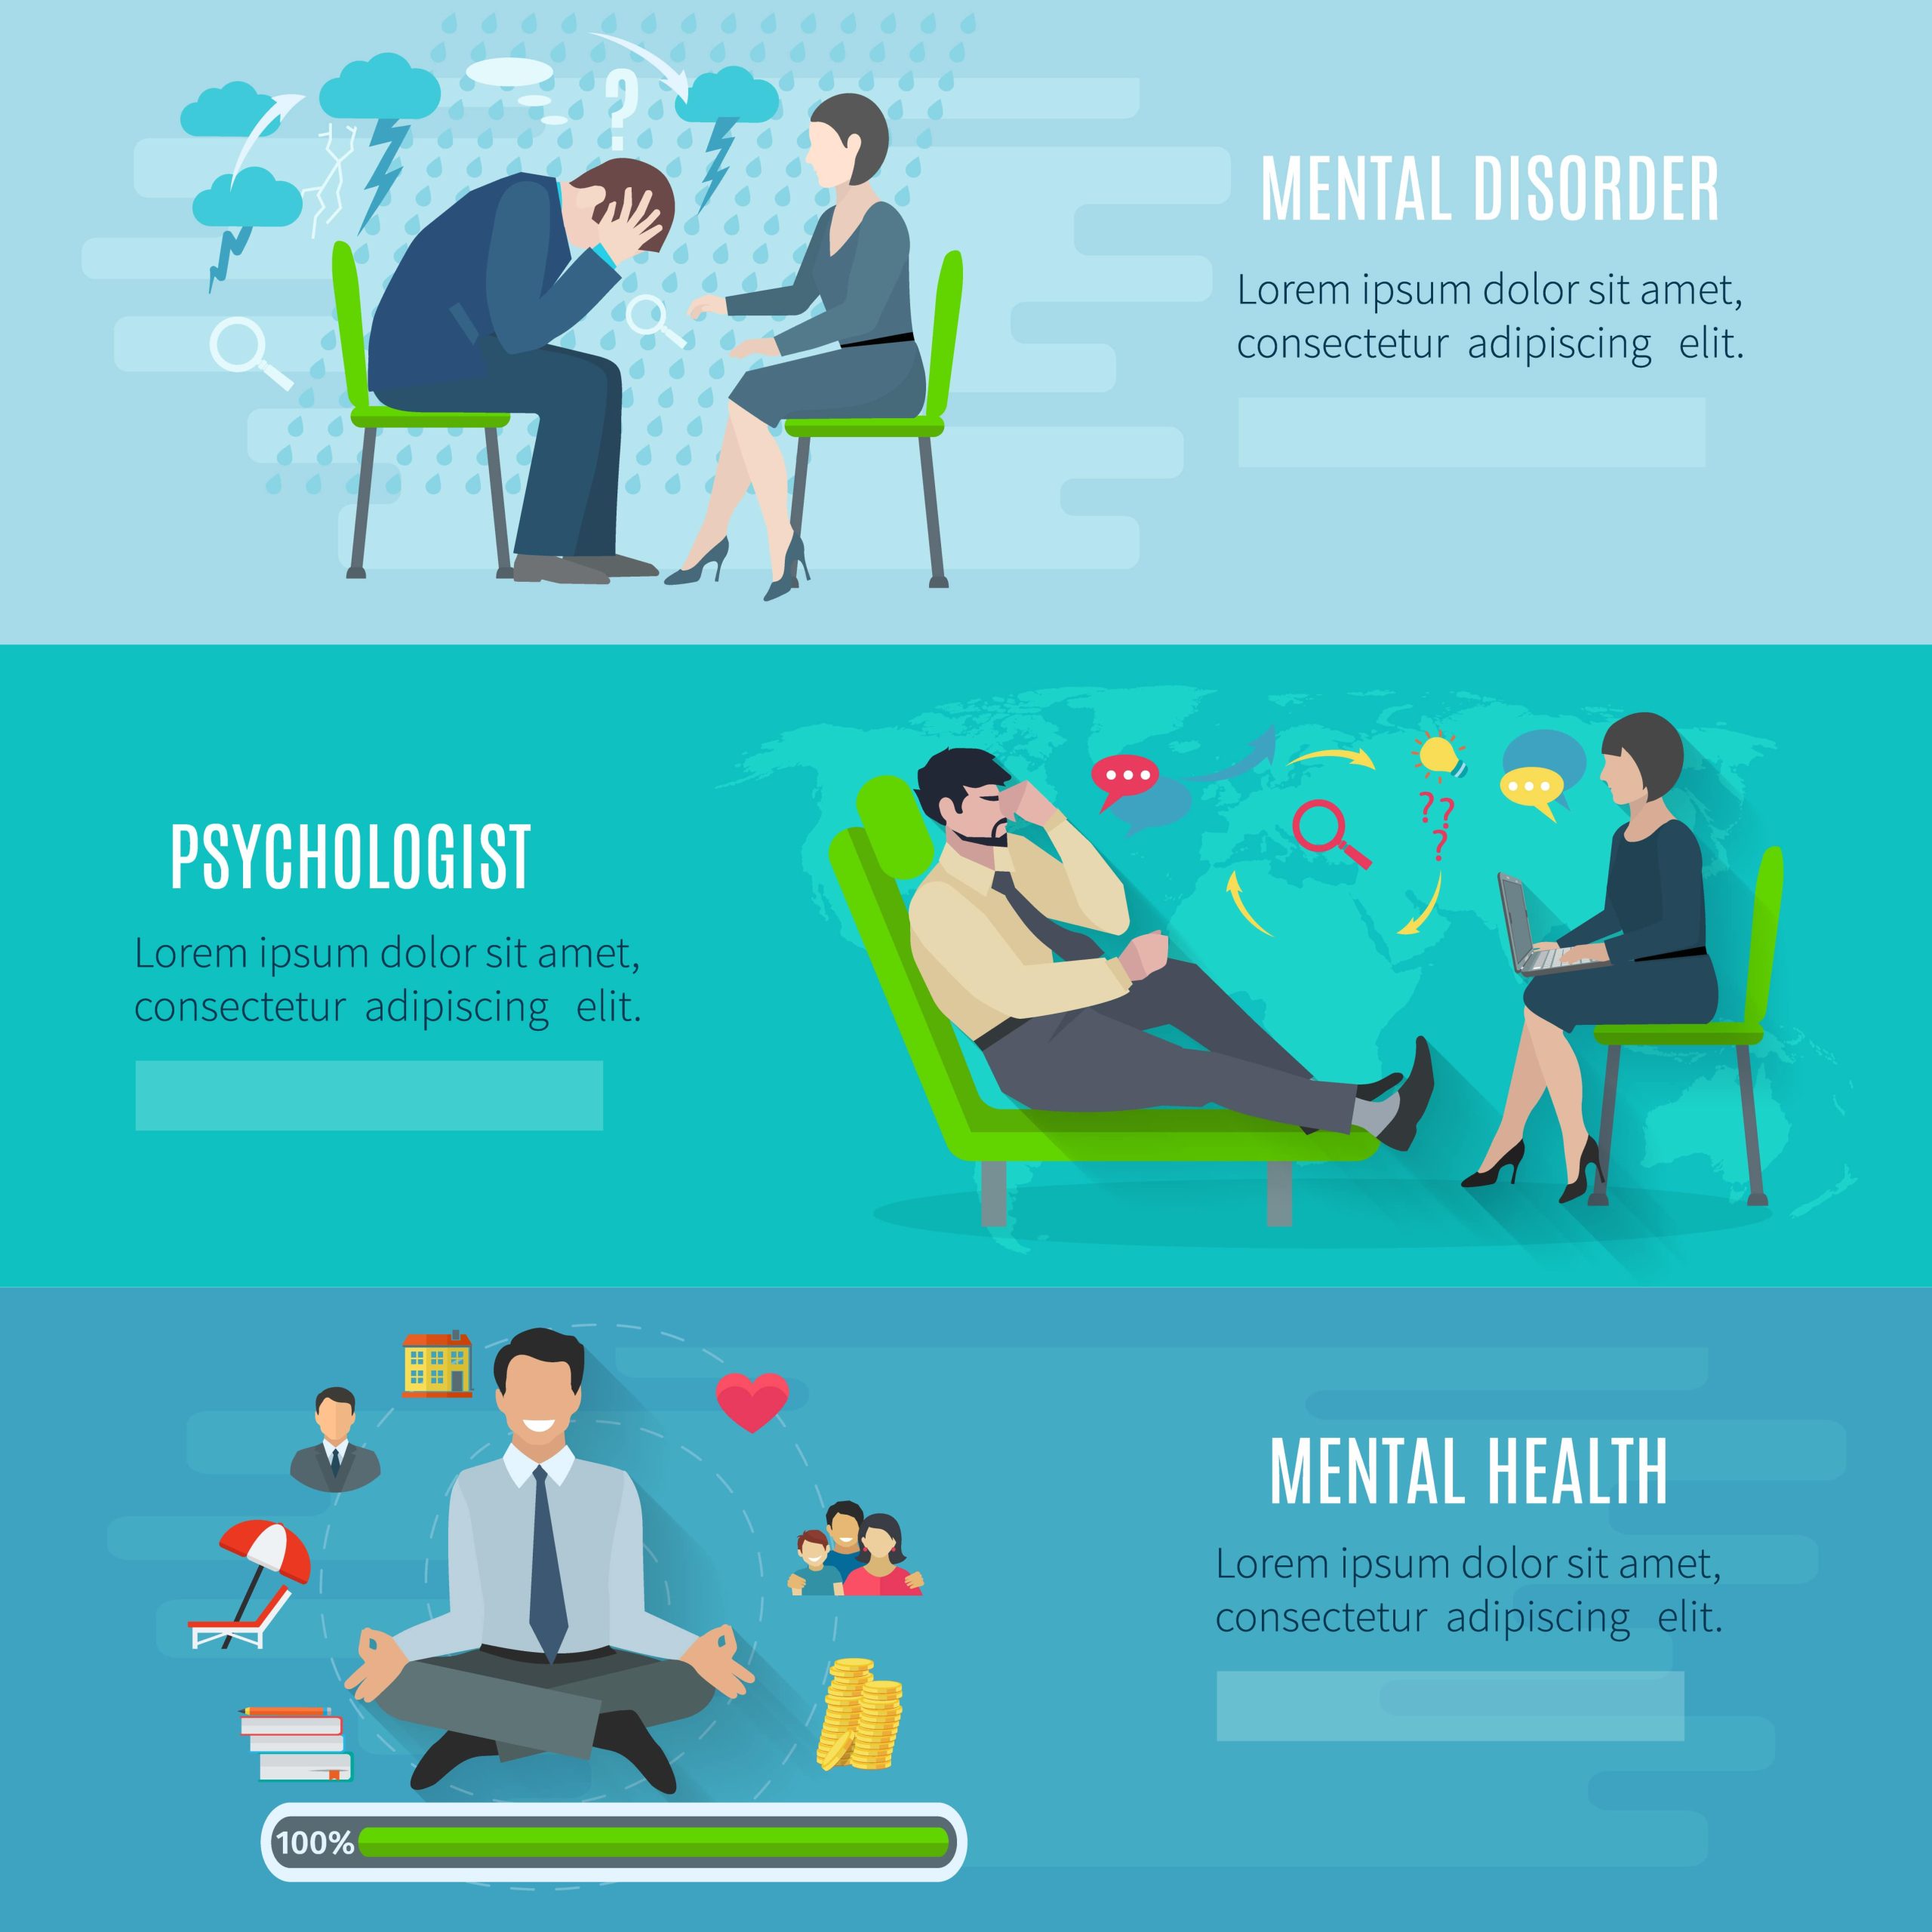 mental-health-solutions-employers. Boost employee well-being with unique mental health solutions: therapy access, stress relief programs, and a supportive culture.